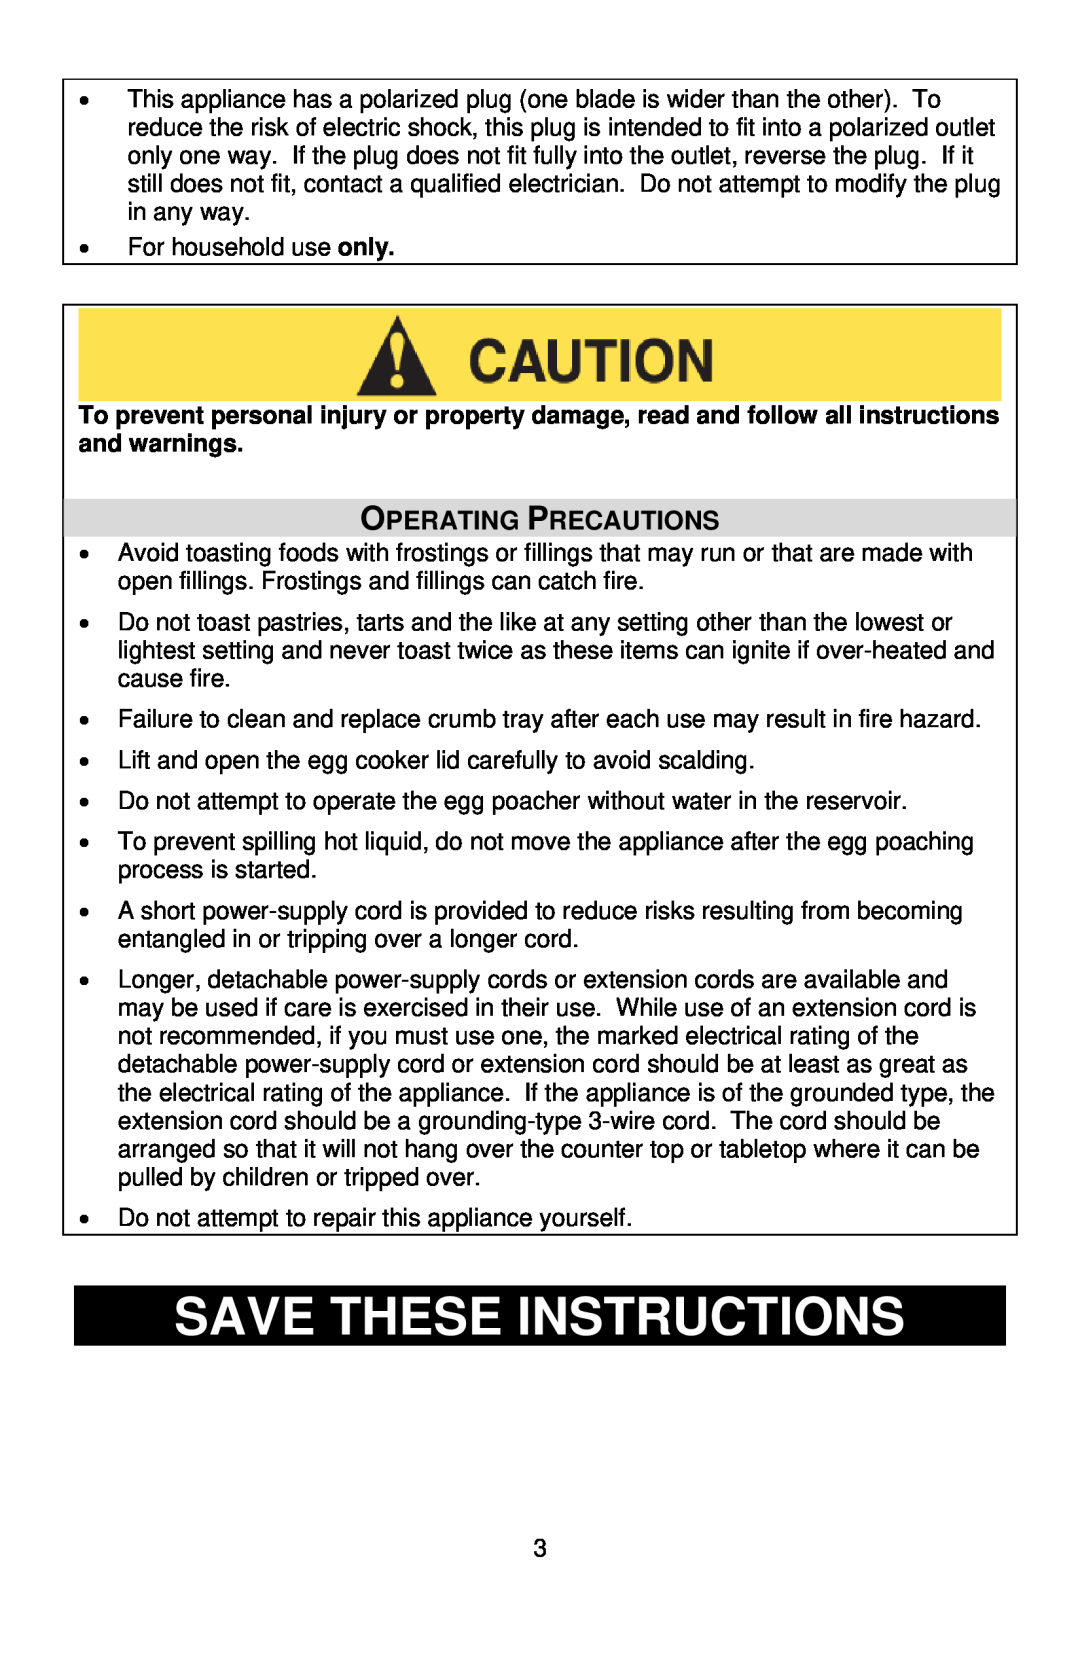 West Bend 78822, L5769 instruction manual Save These Instructions, Operating Precautions 